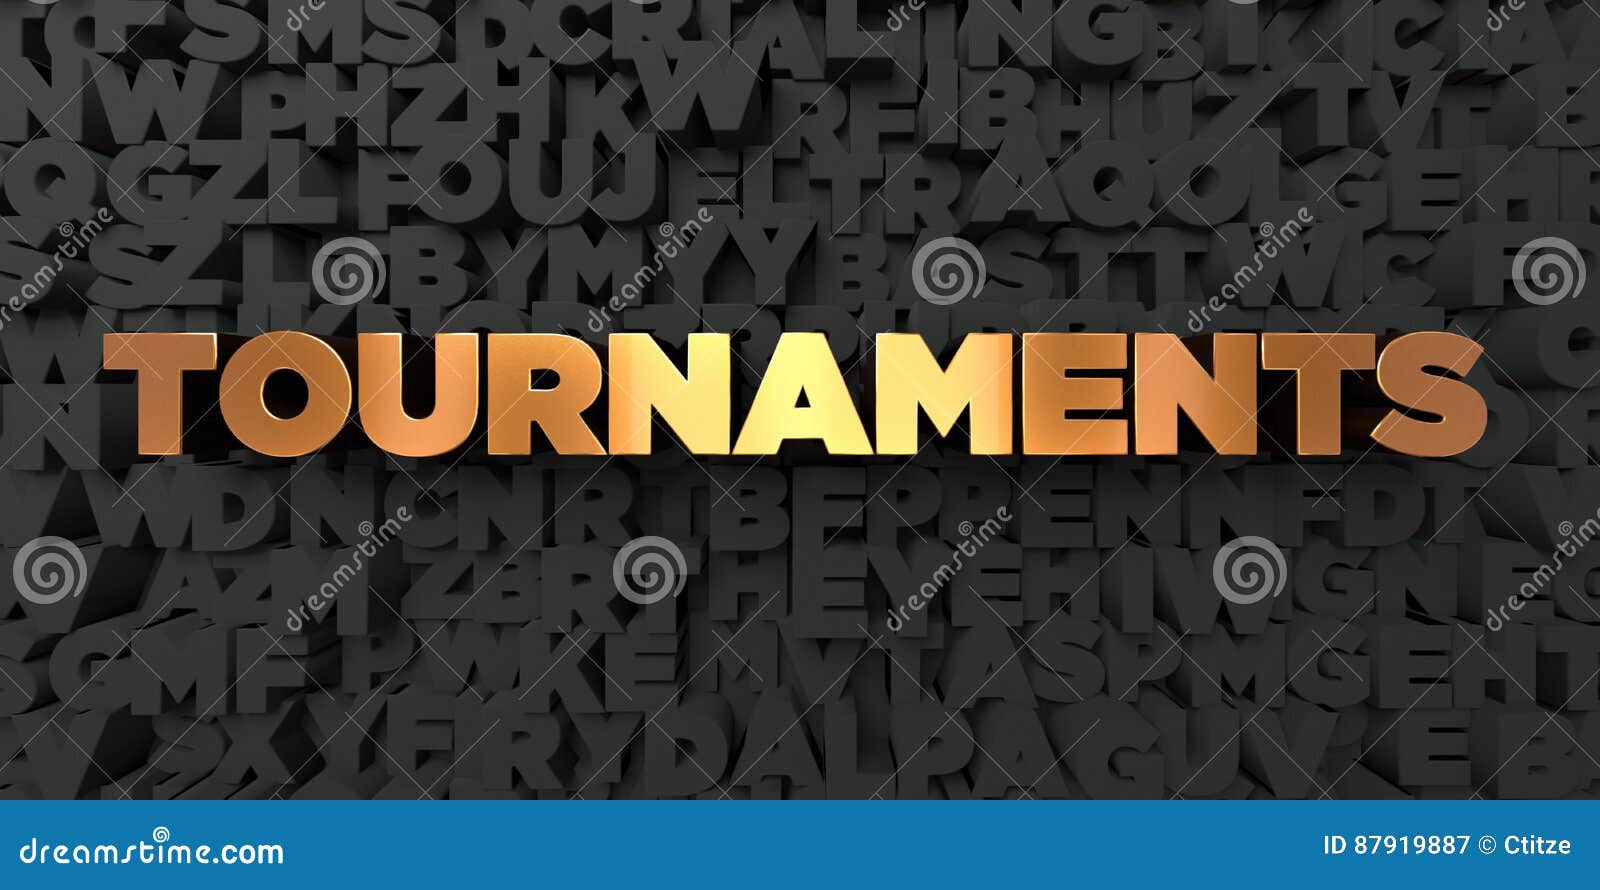 tournaments - gold text on black background - 3d rendered royalty free stock picture